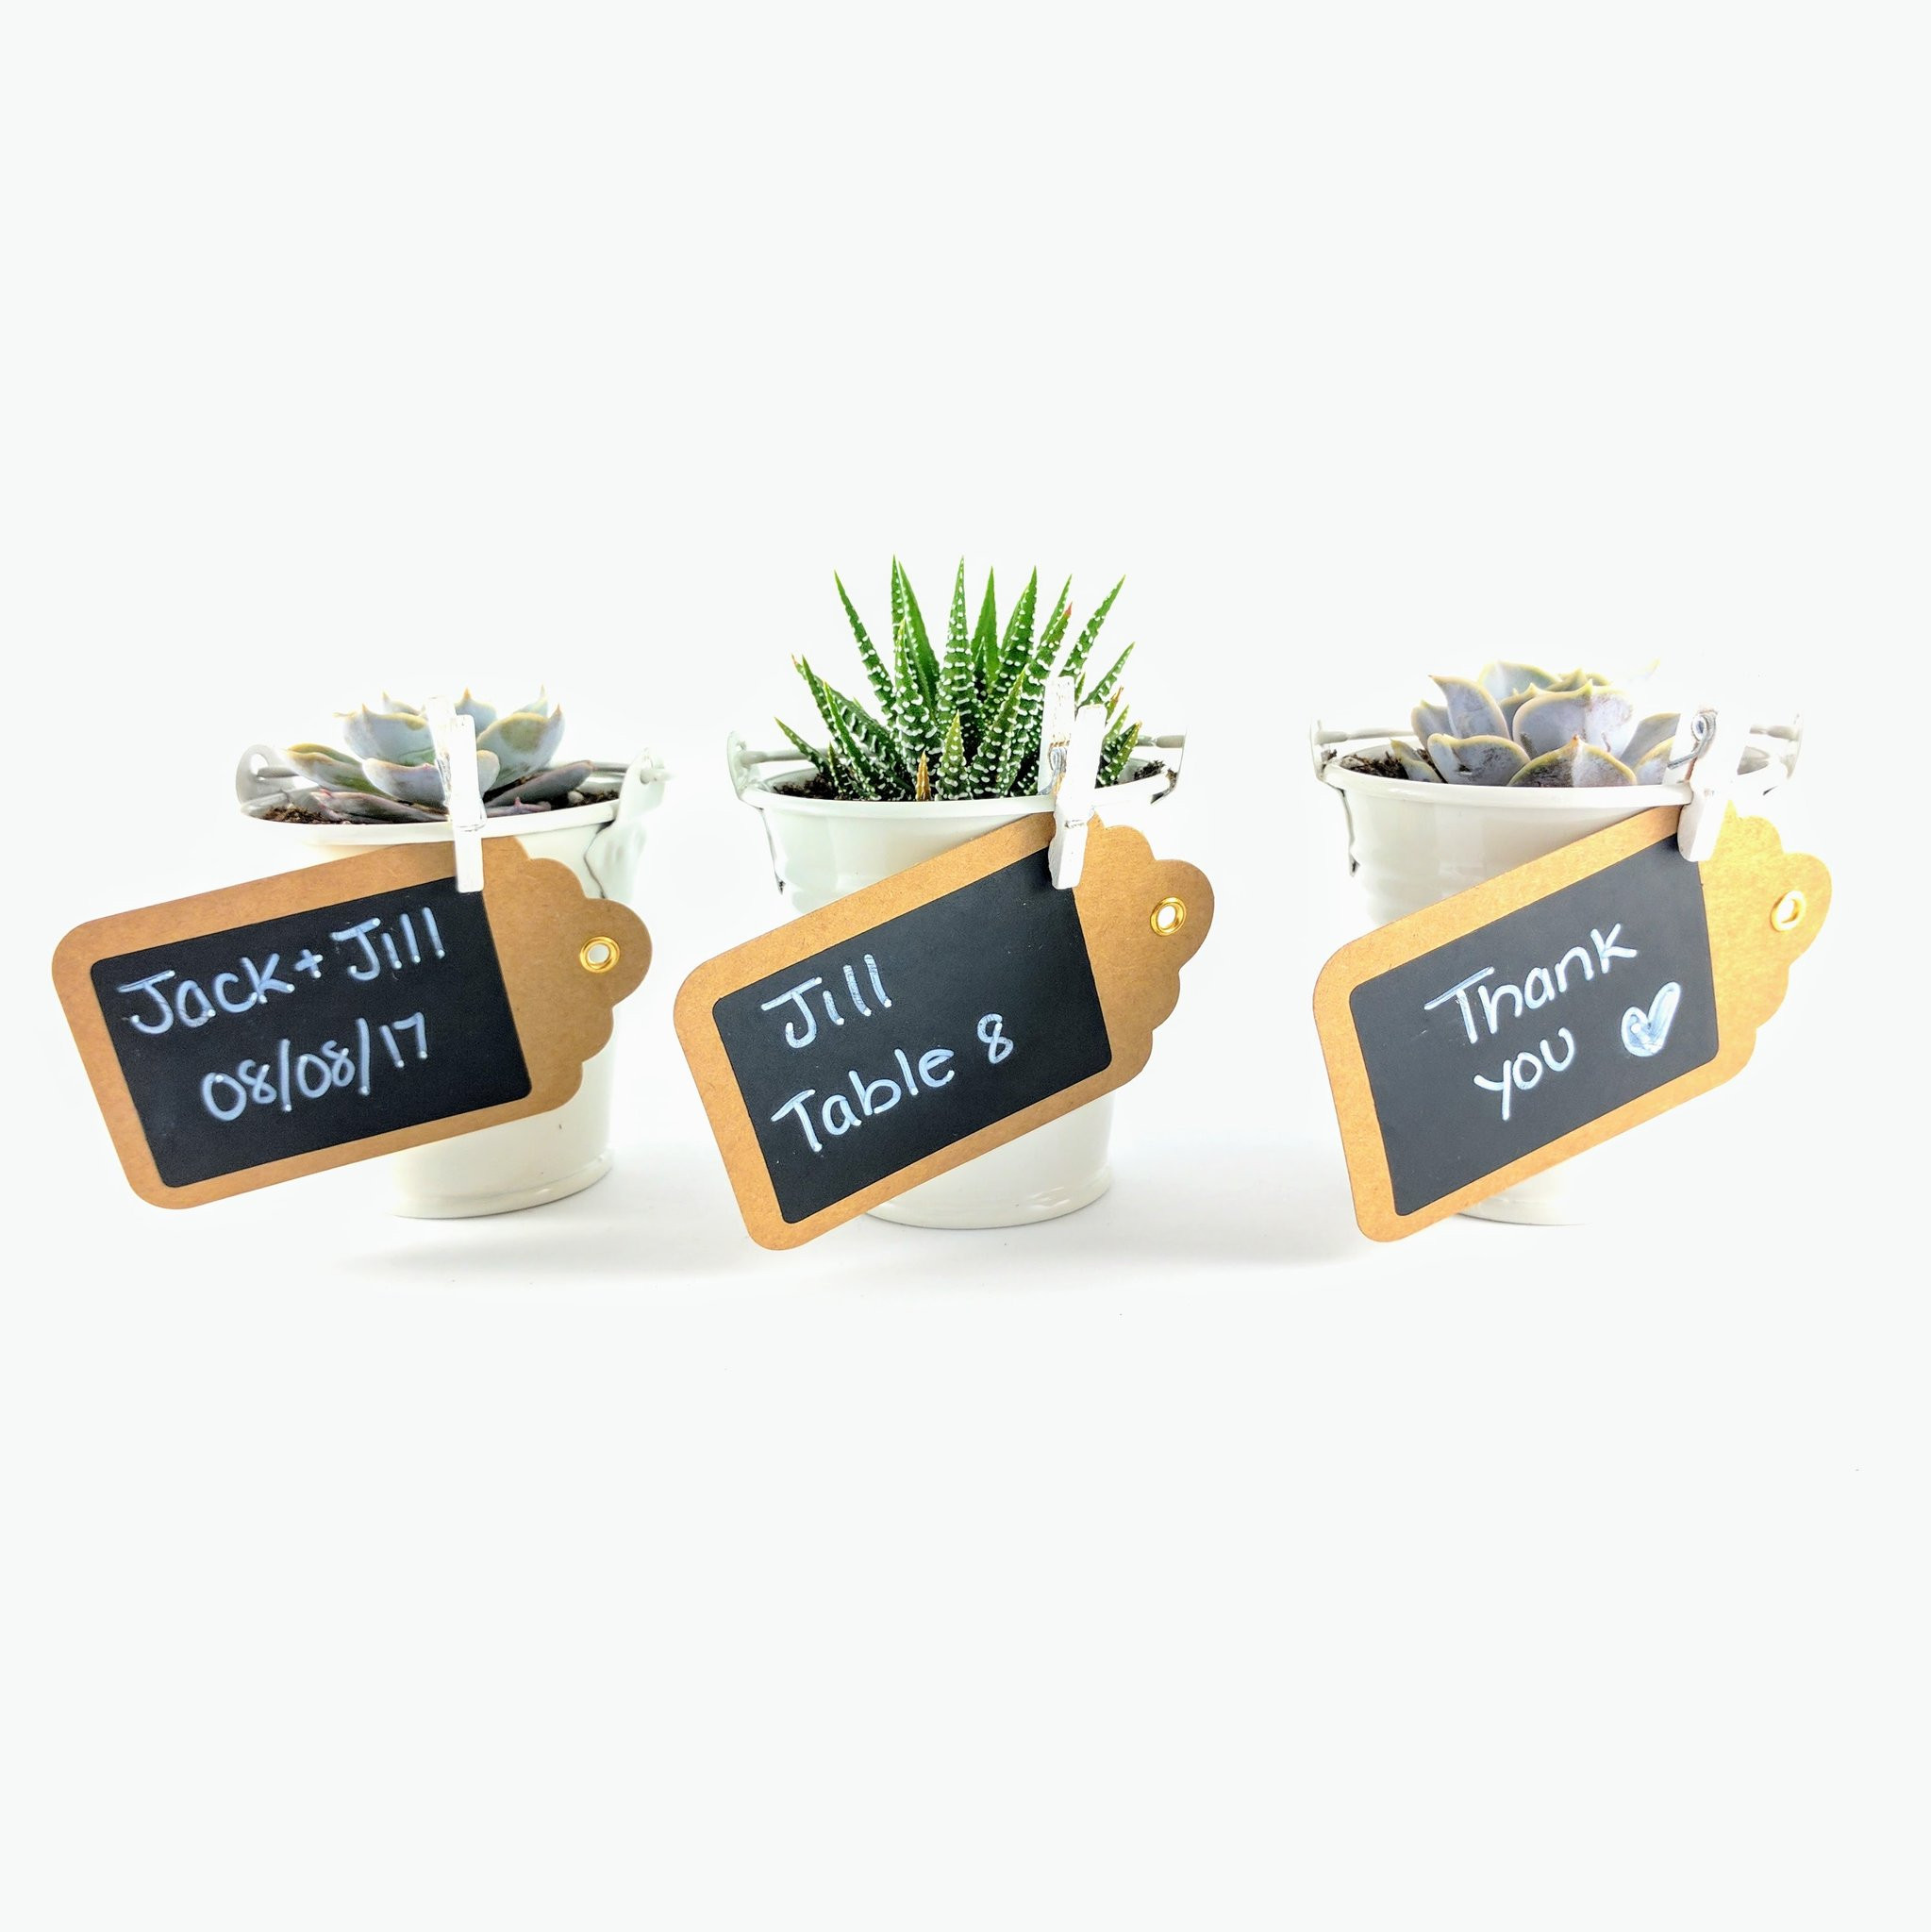 Wedding Favors Unlimited Coupon
 Inspirations Wedding Favors Unlimited For Nice Home Decor